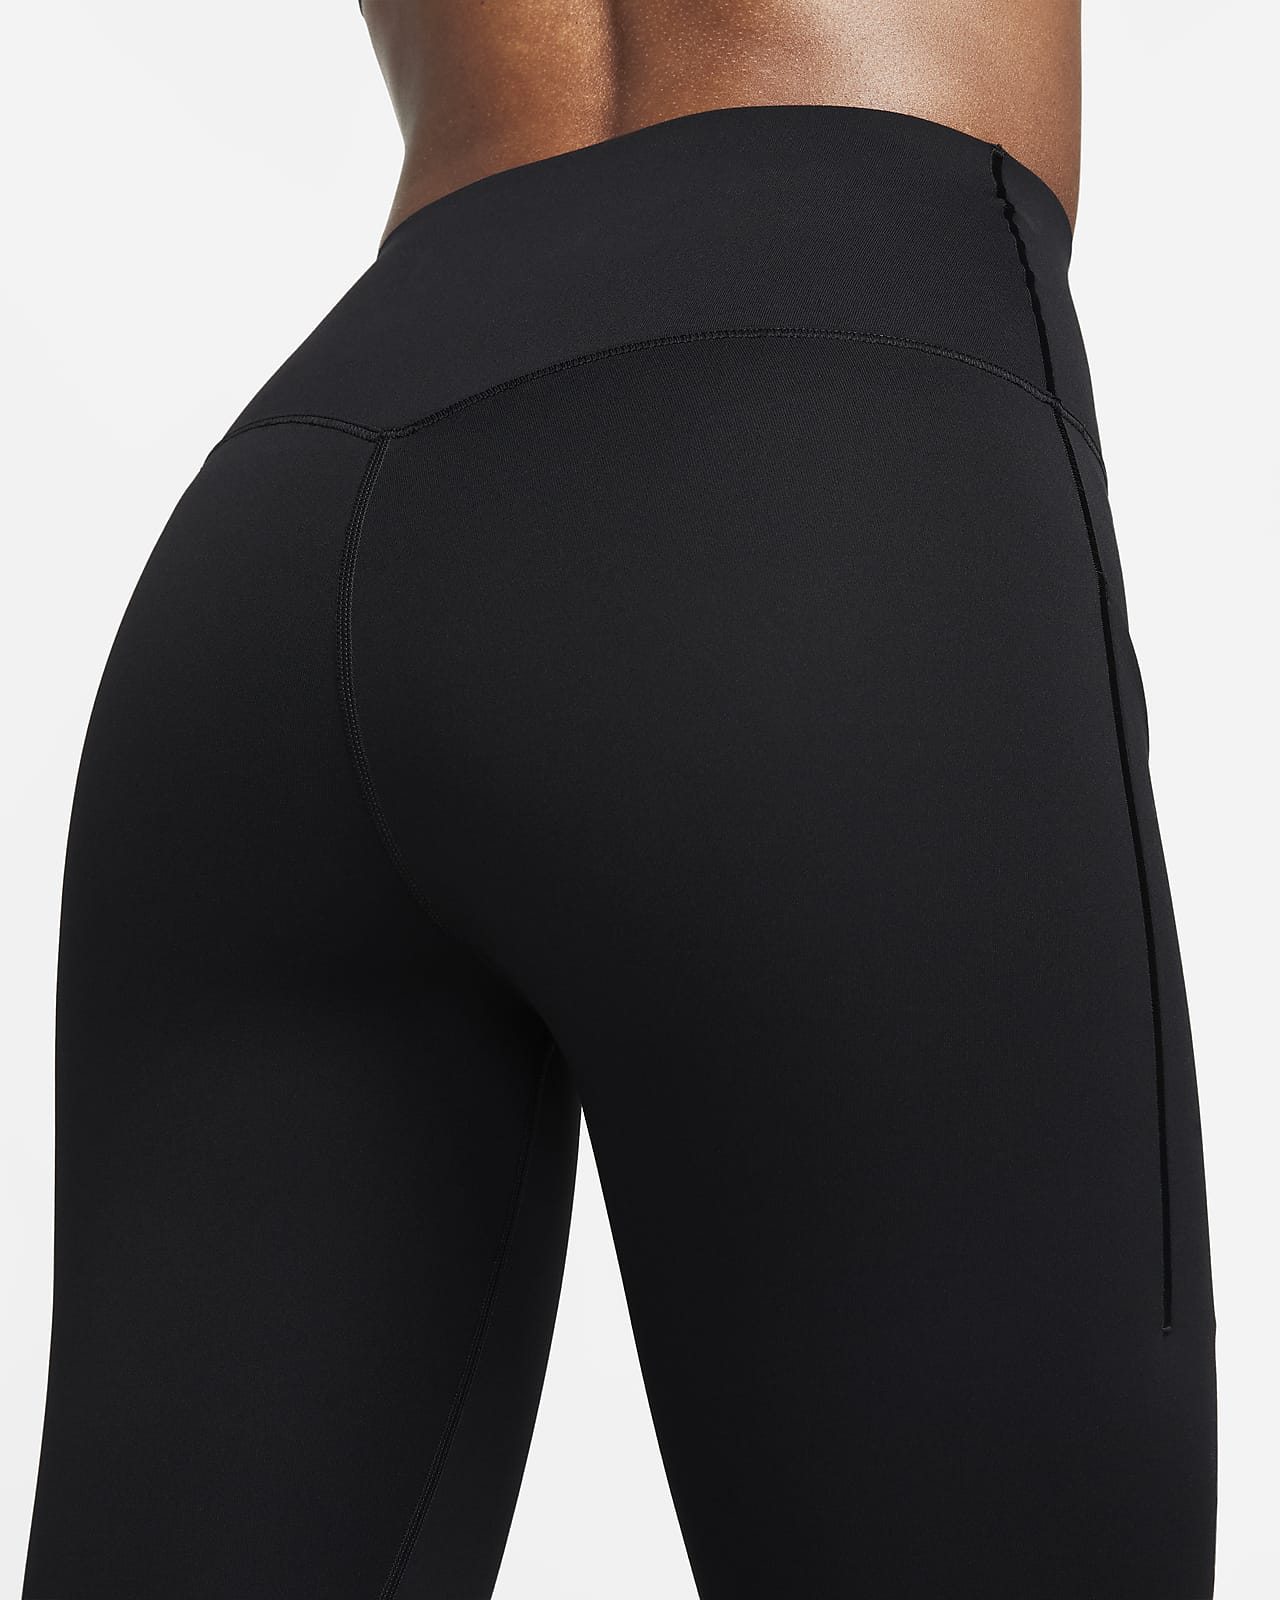 Natural Feelings High Waisted Leggings For Women Ultra Soft Stretch Opaque  Slim Yoga Leggings One Size Plus Size From 30,48 €